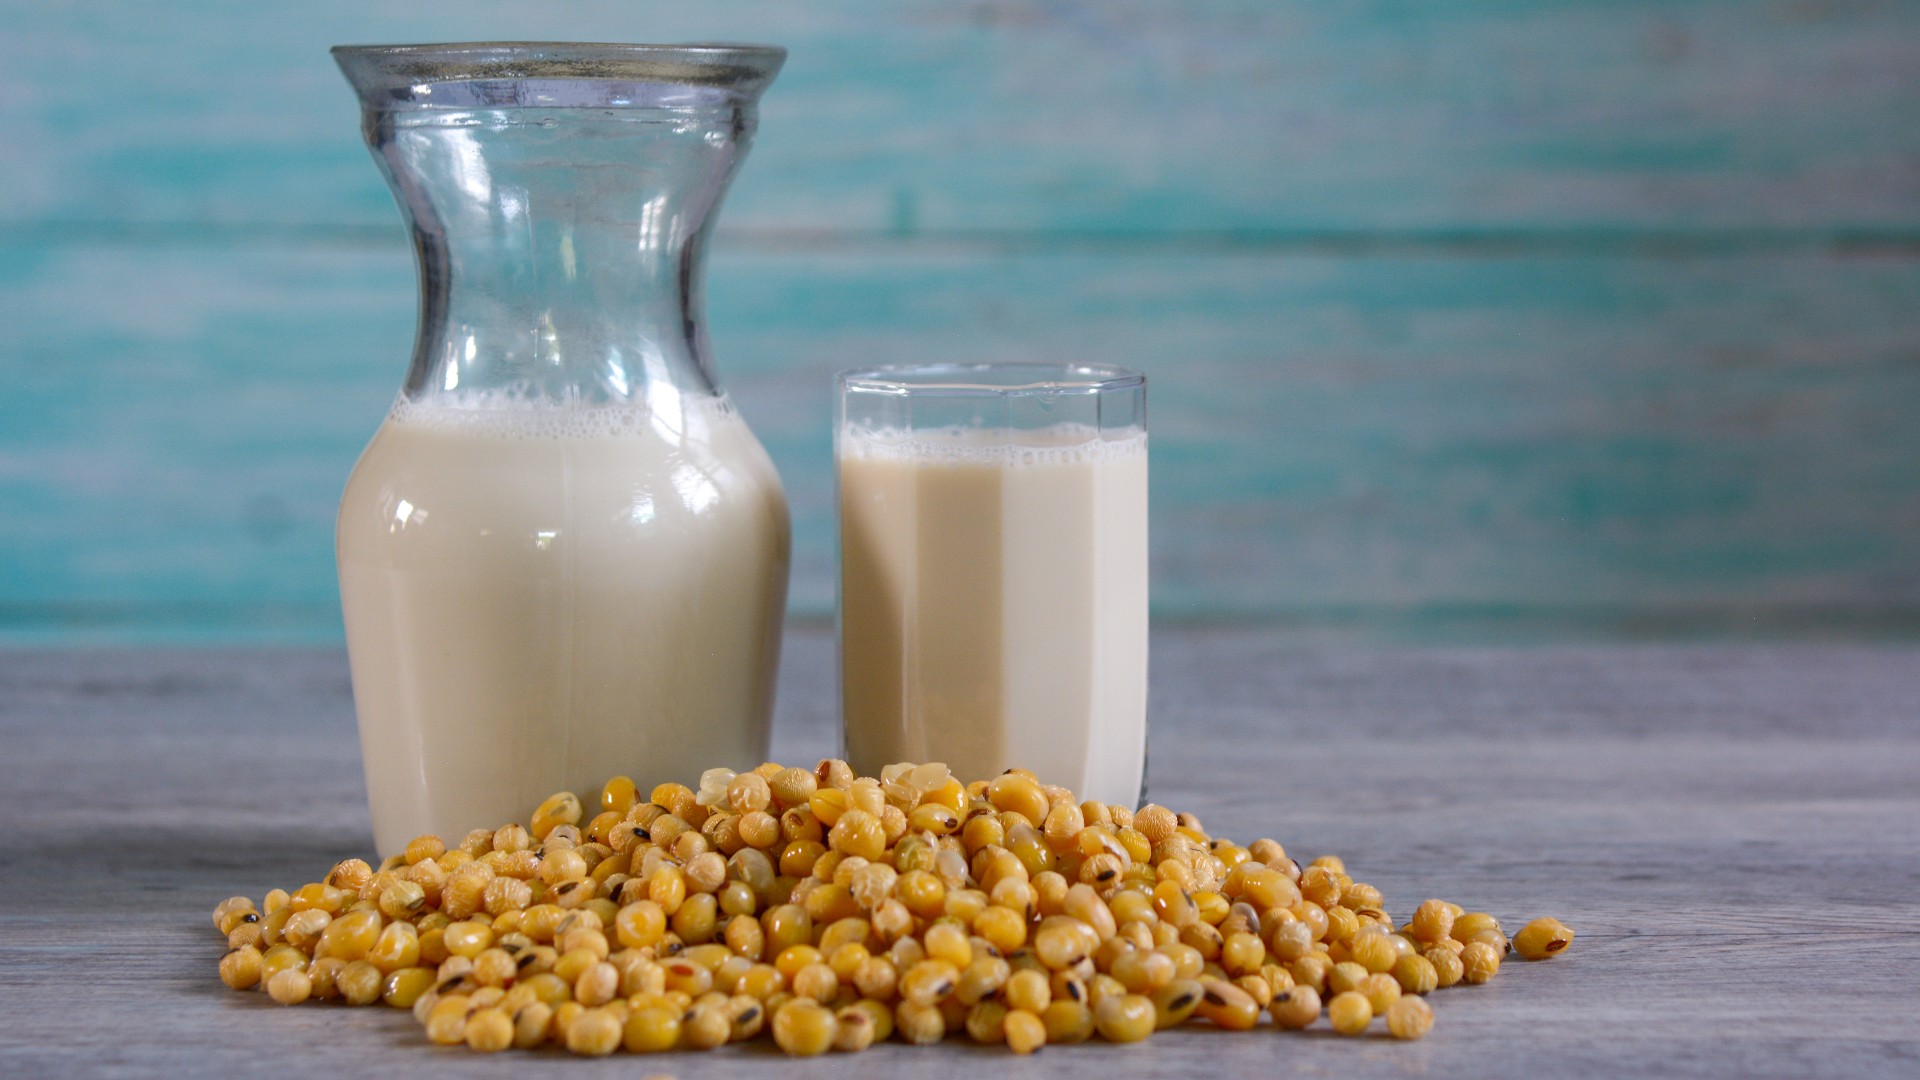 Soy milk in bottle and jar with soybeans in front